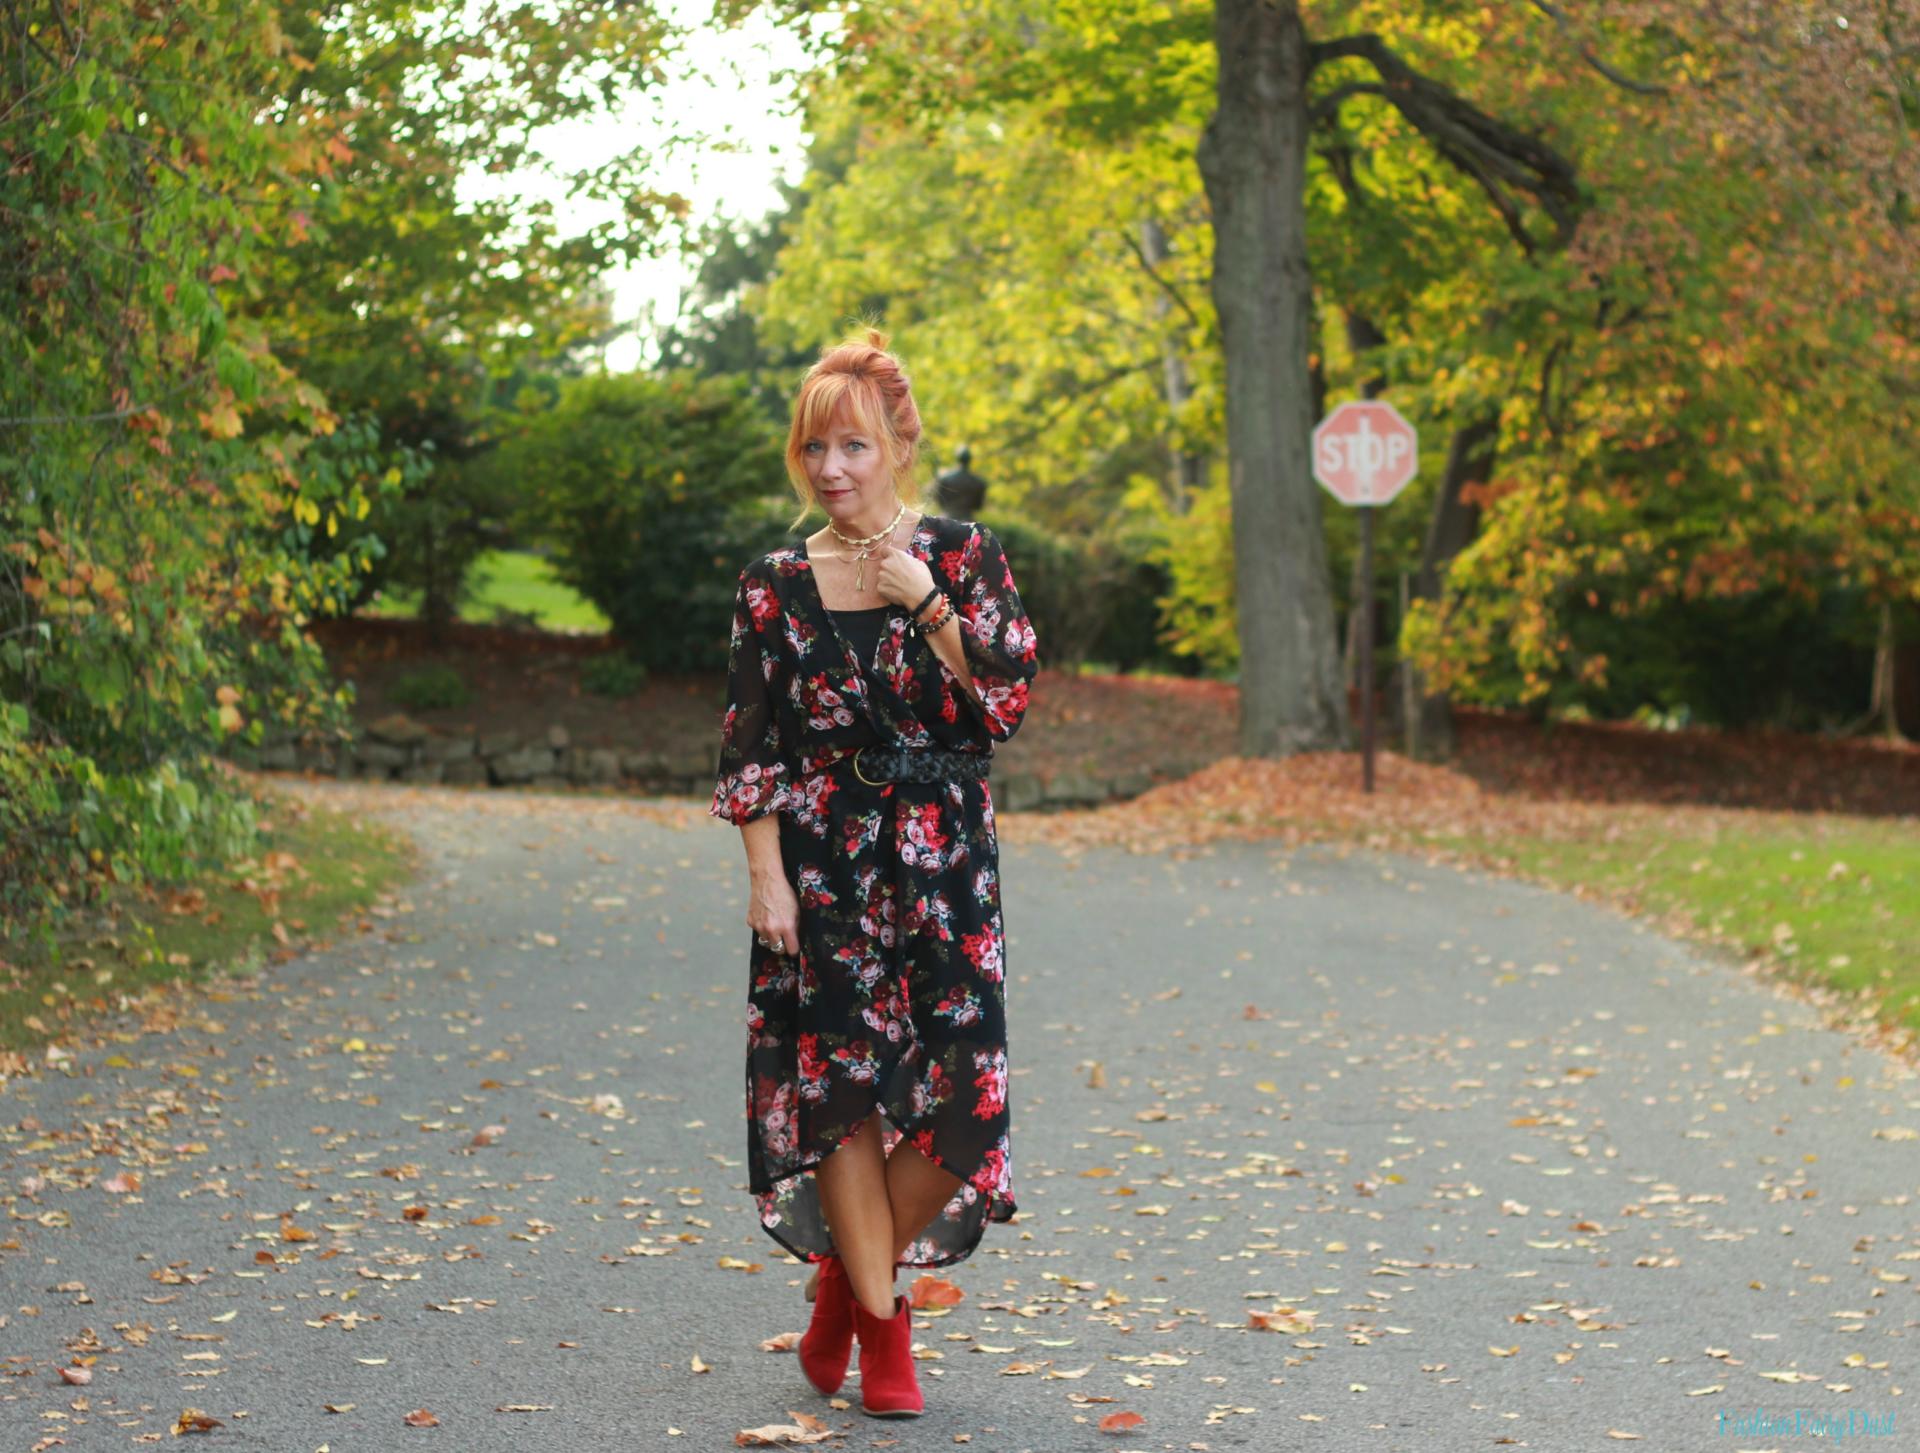 Floral kimono as a dress and red ankle boots.